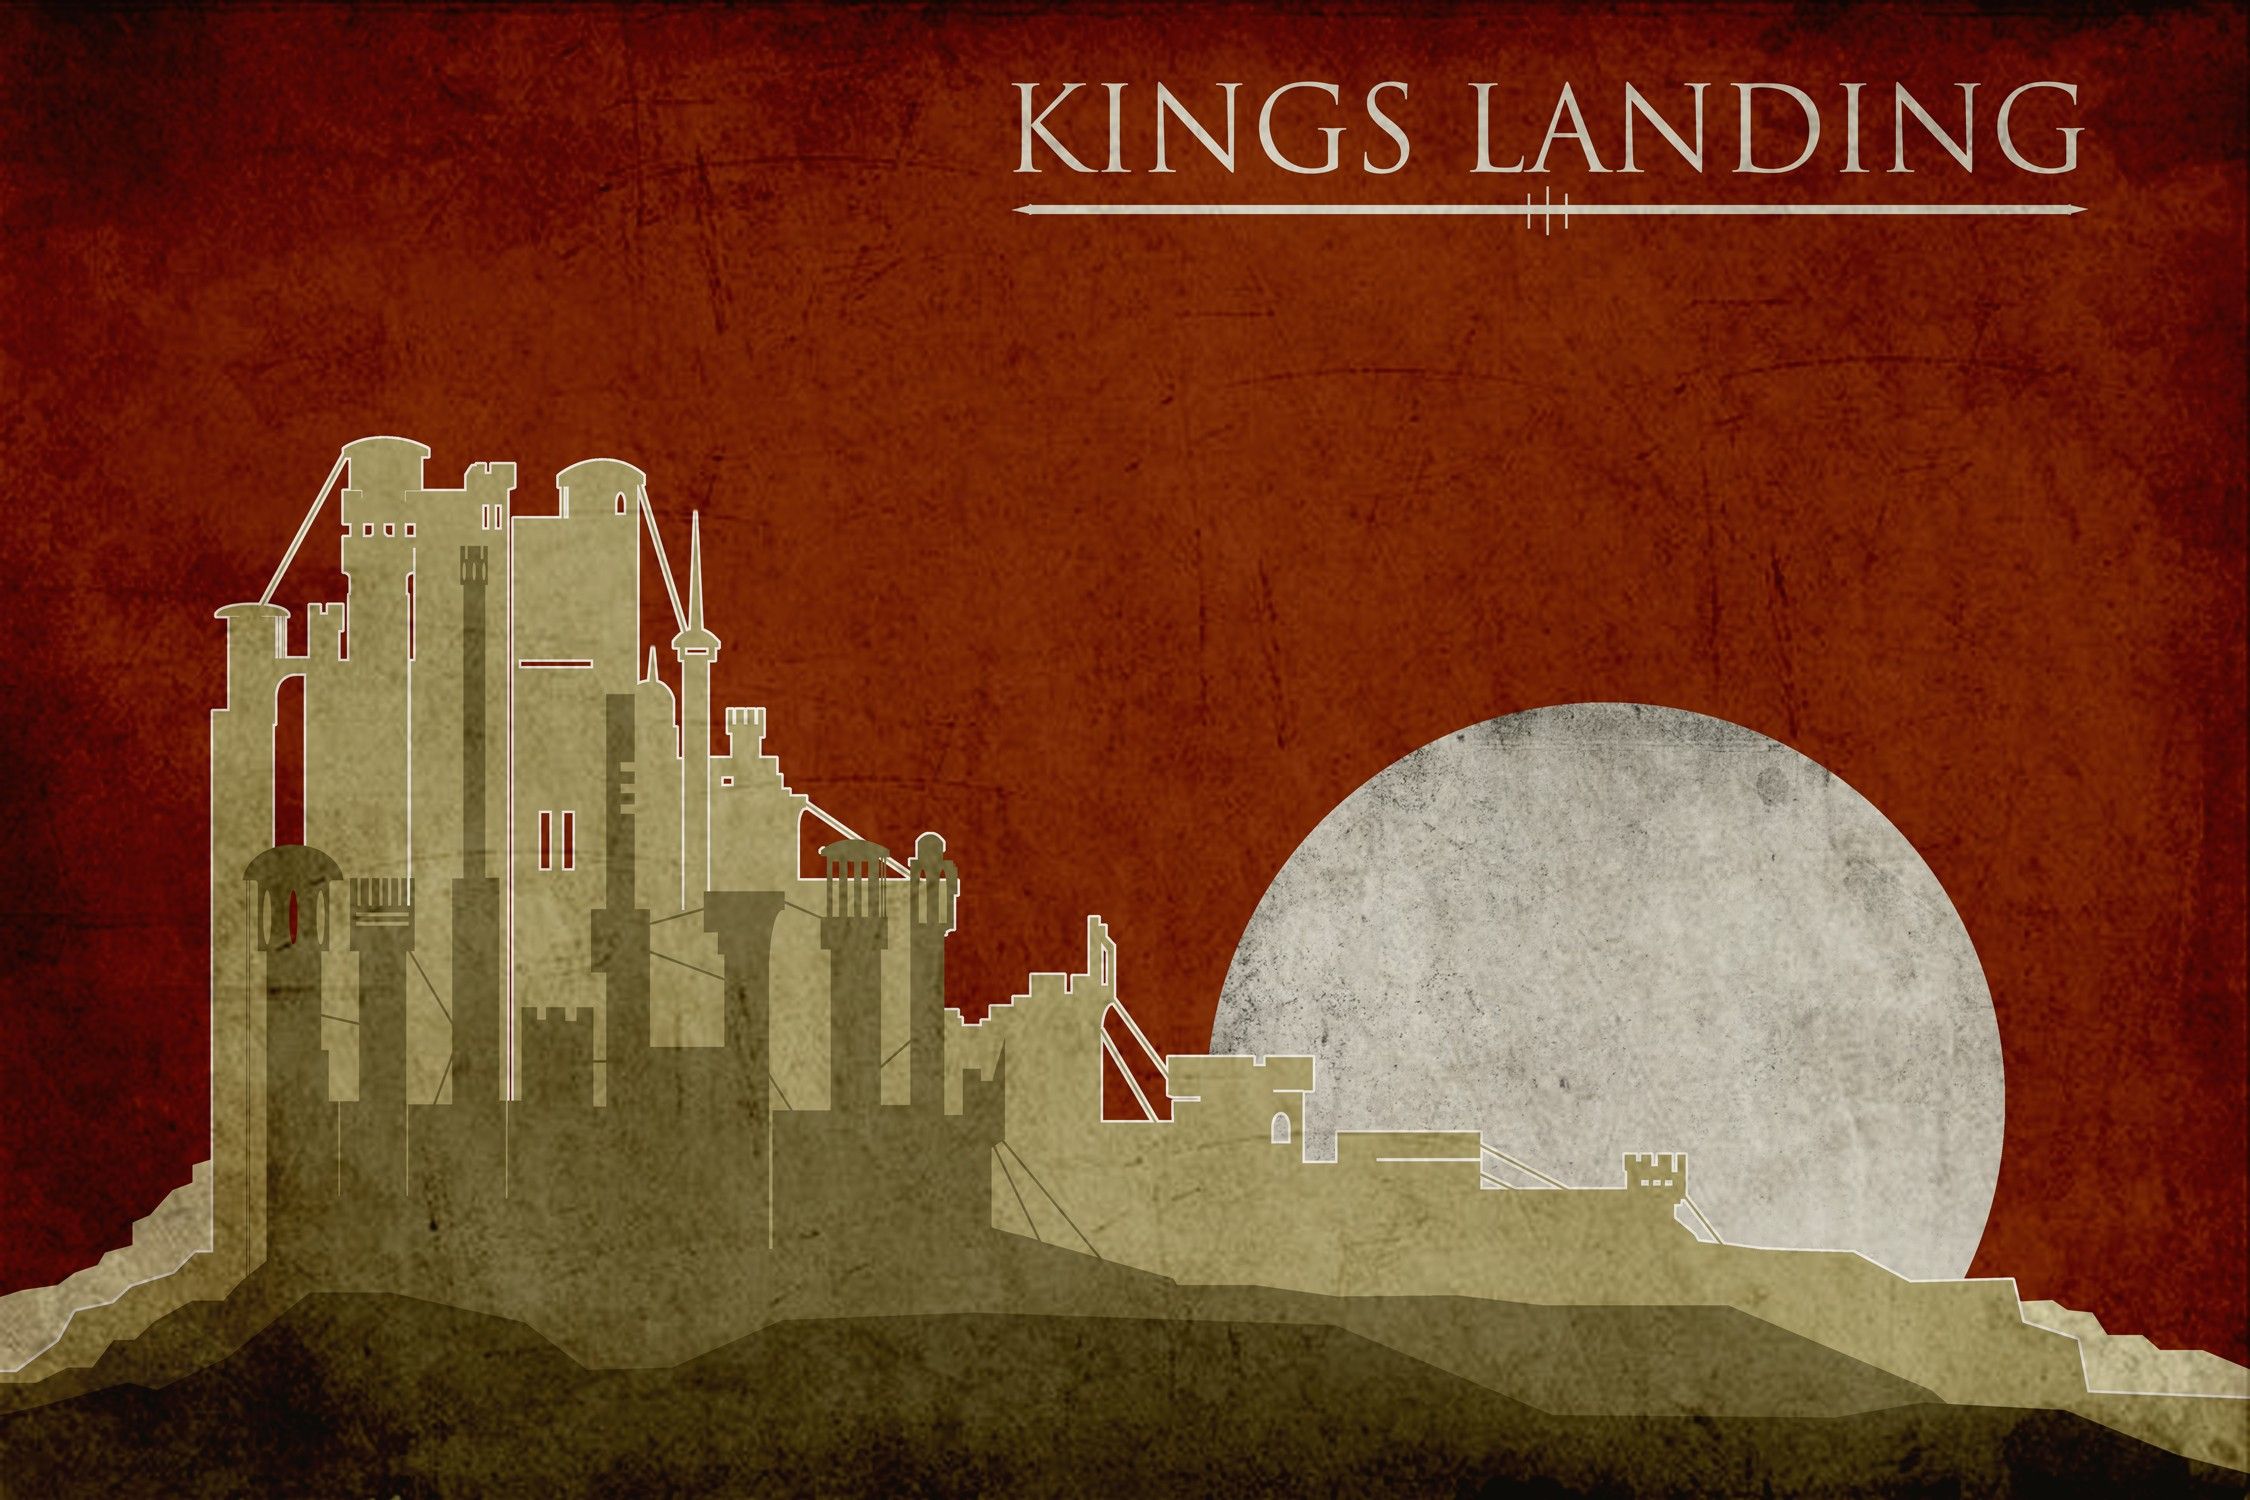 castles, fantasy art, Game of Thrones, A Song Of Ice And Fire, HBO